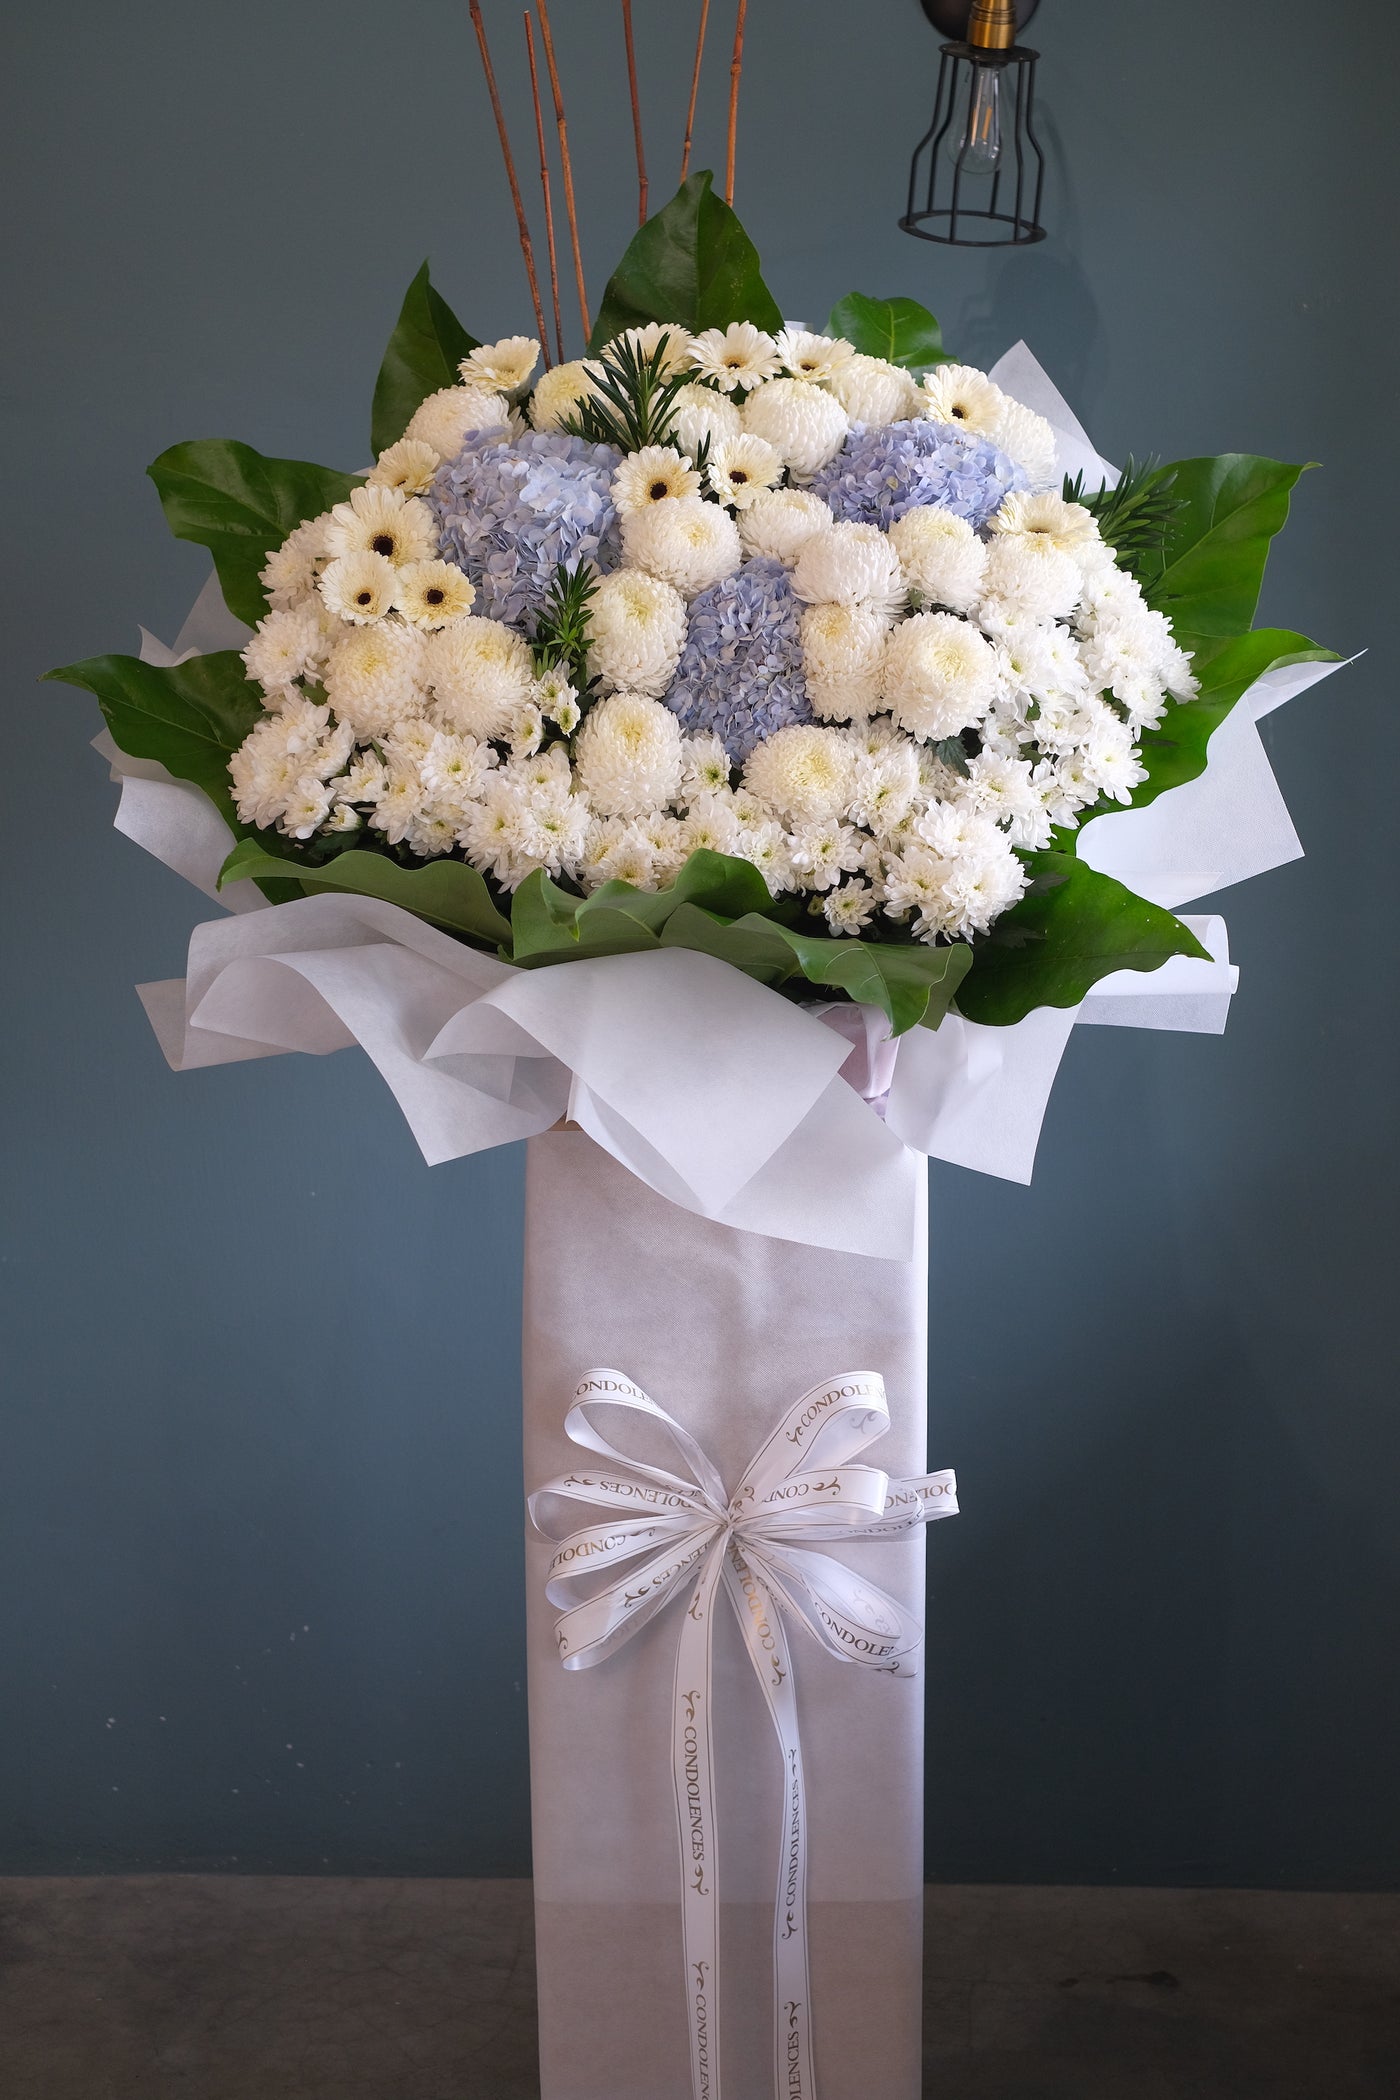 Condolences Flowers delivery to Penang. This beautiful, bright white flowers and soothing blues create a peaceful presentation at any funeral or wake. The classic condolences wreath is delivered on a two tier stand, and is a gracious expression of sympathy and appreciation. 